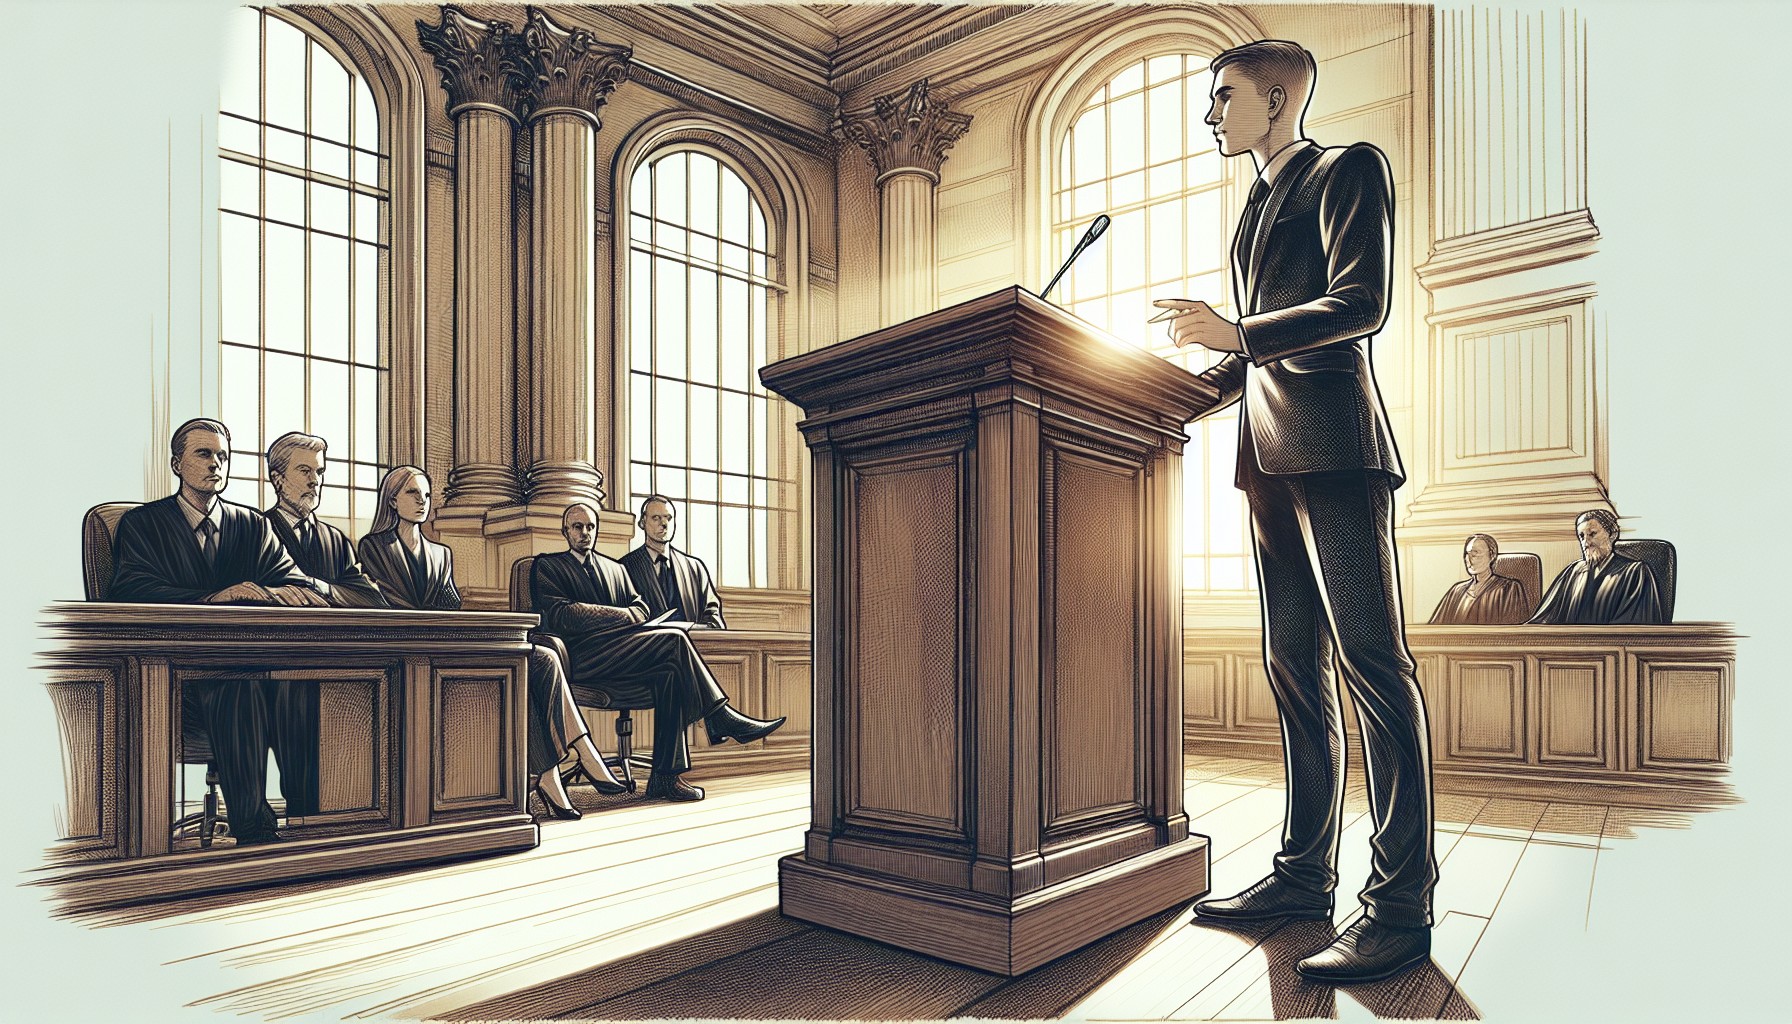 Illustration of presenting a case at the court hearing